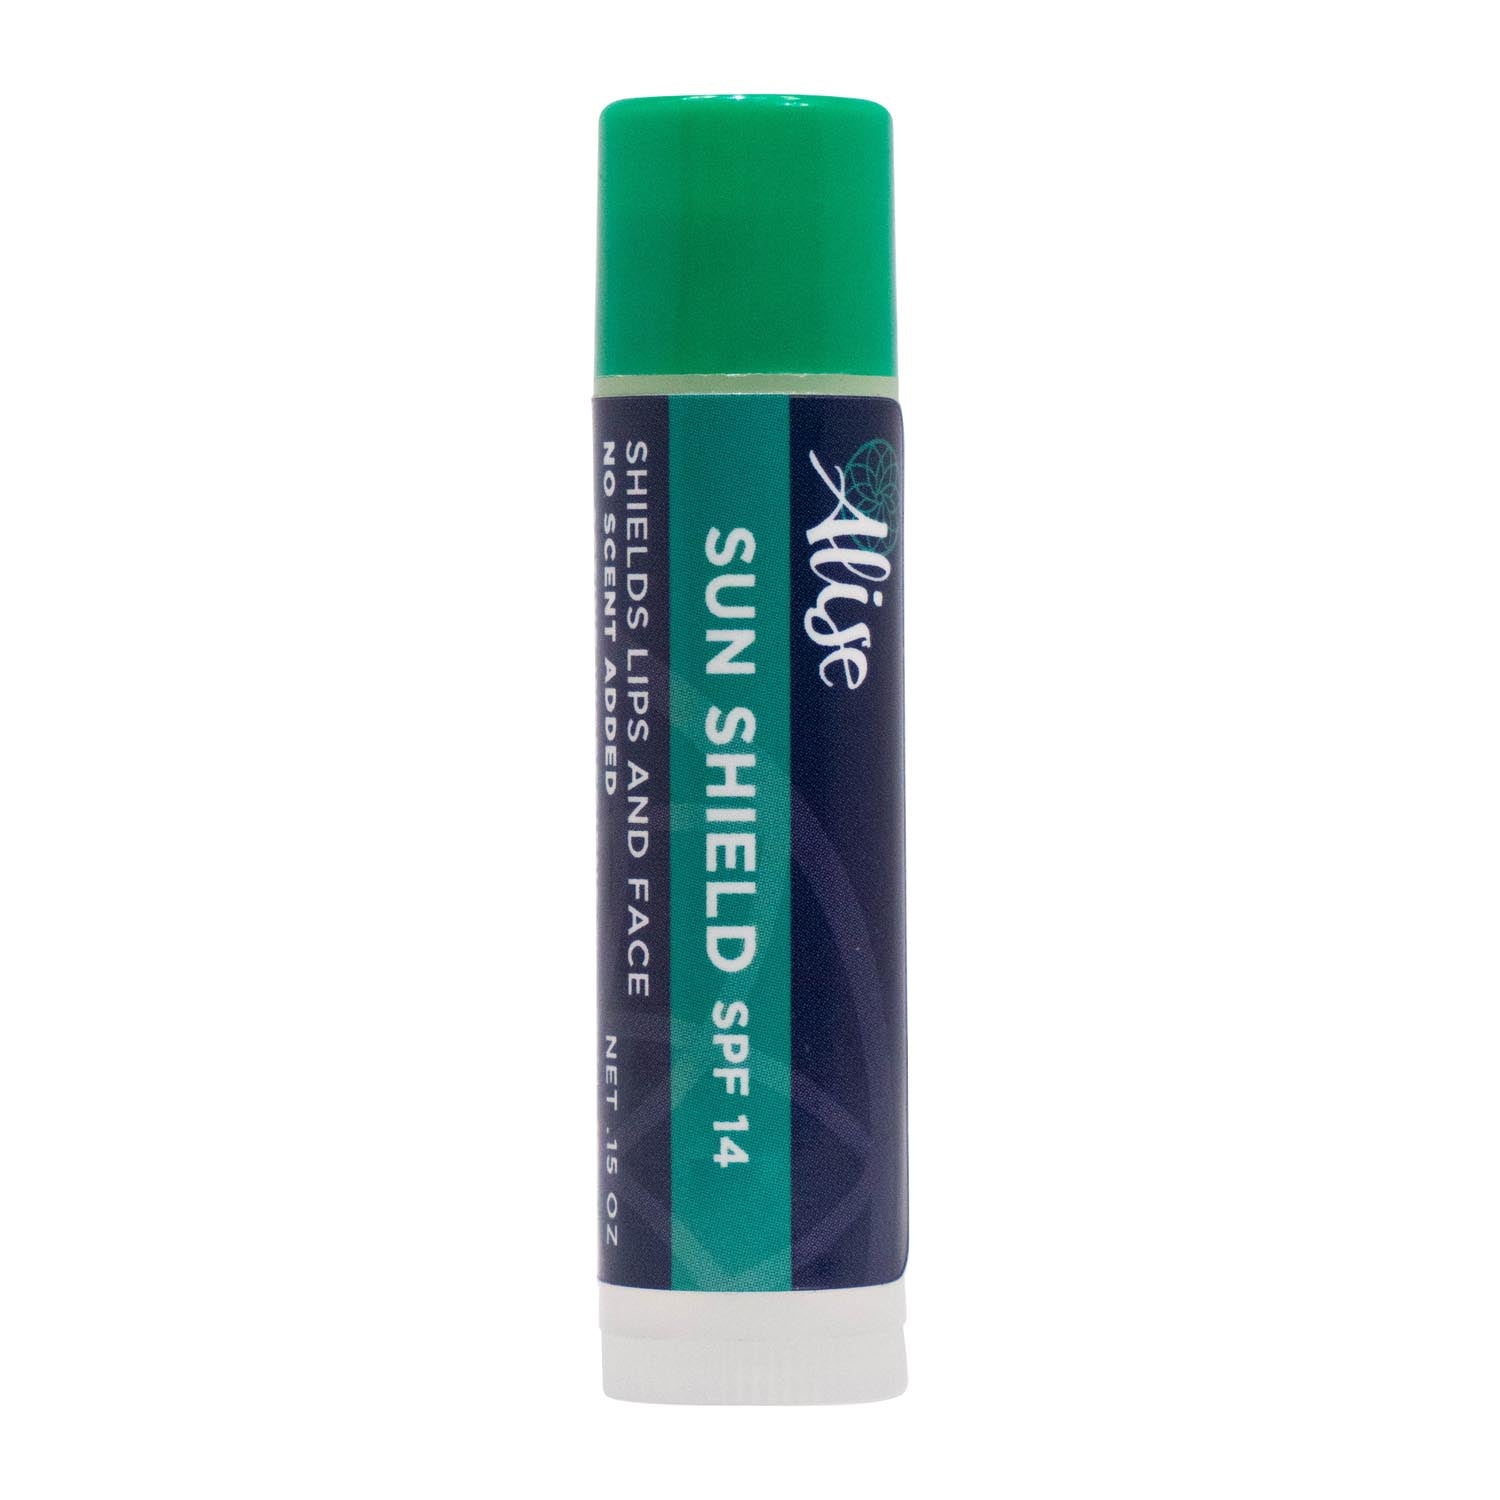 Sun Shield SPF Lip Balm handcrafted by Alise Body Care